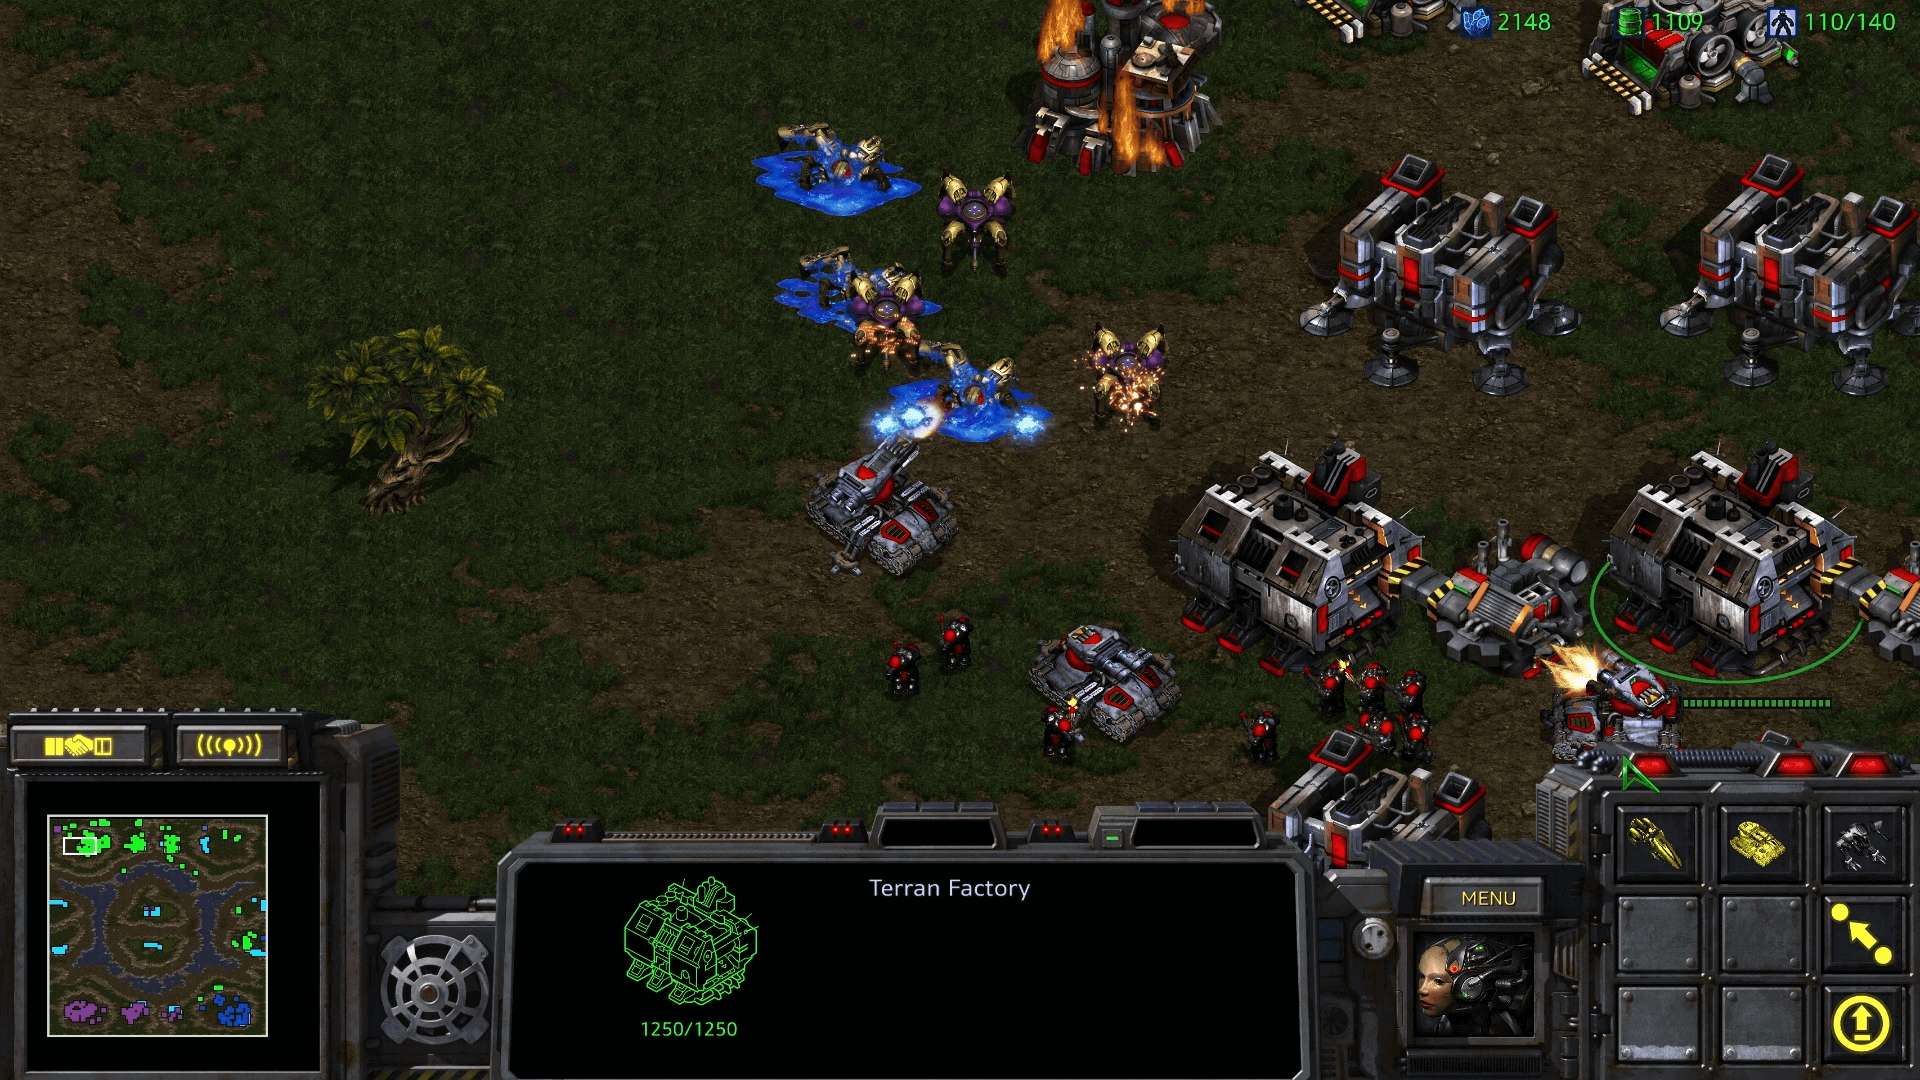 starcraft remastered patch notes